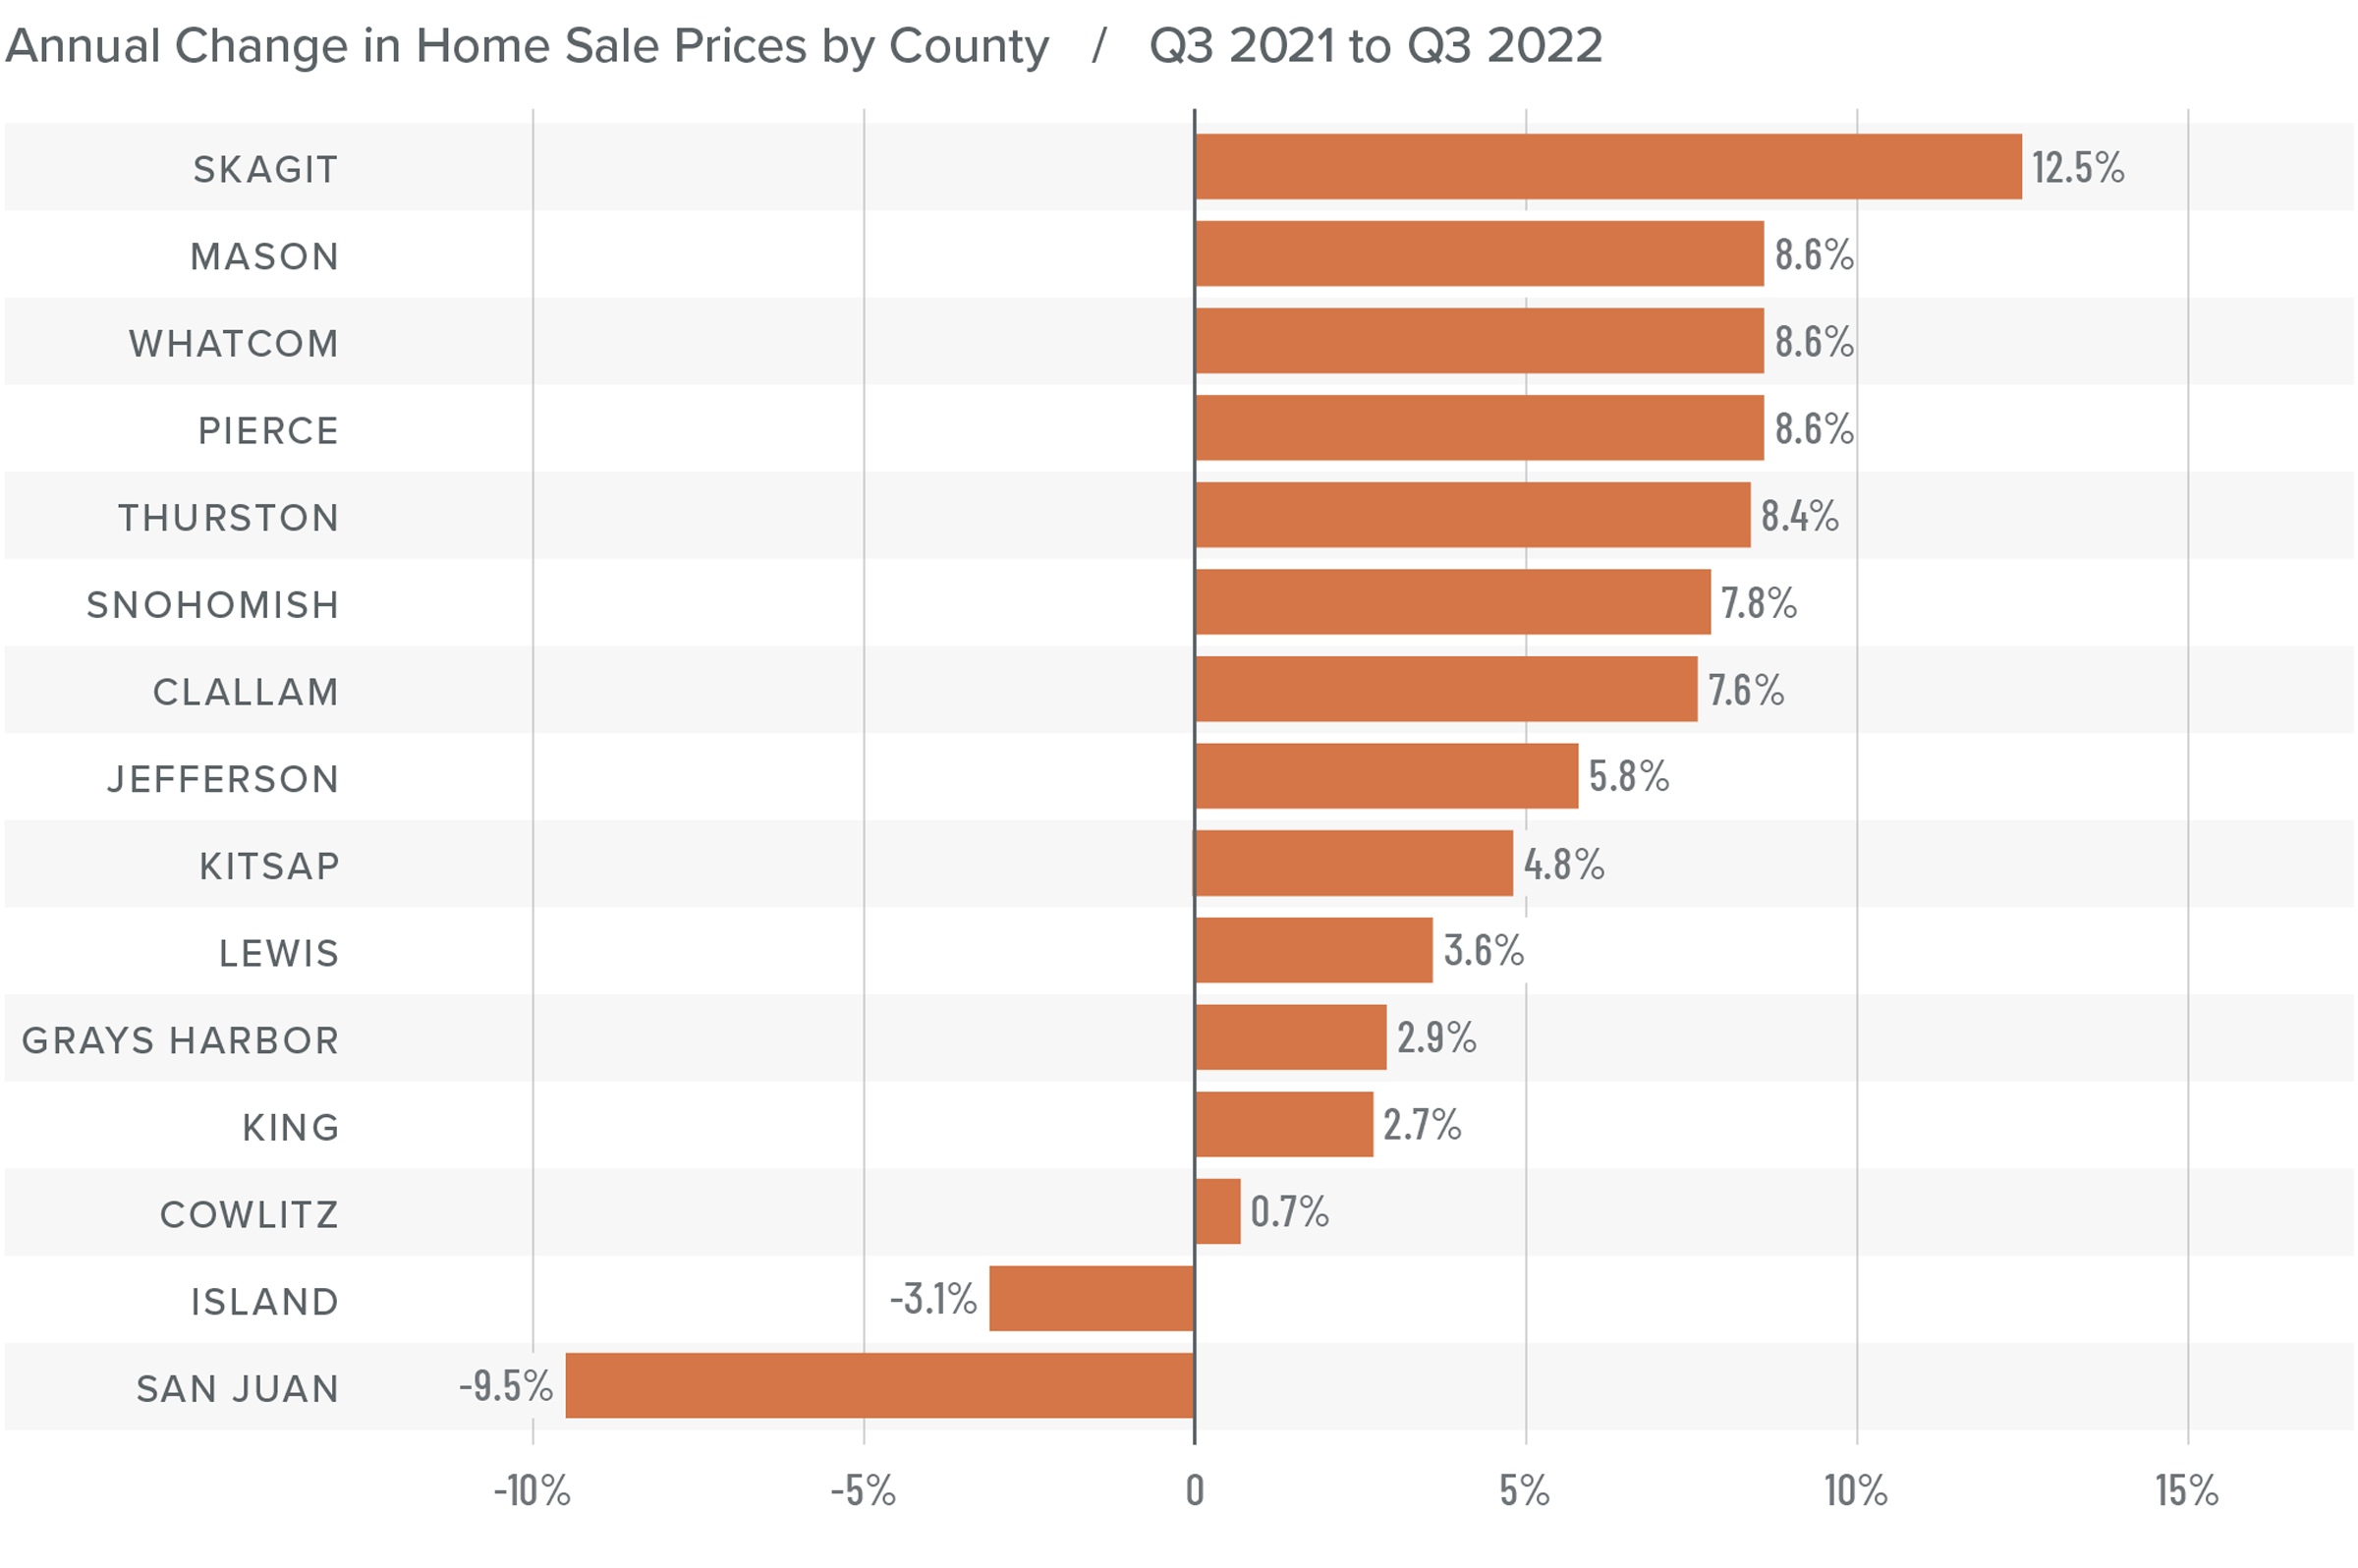 A bar graph showing the annual change in home sale prices for various counties in Western Washington from Q3 2021 to Q3 2022. Skagit county tops the list at 12.5%, followed by Mason, Whatcom, and Pierce counties at 8.6%, Thurston at 8.4%, Snohomish at 7.8%, Clallam at 7.6%, Jefferson at 5.8%, Kitsap at 4.8%, Lewis at 3.6%, Grays Harbor at 2.9%, King at 2.7%, Cowlitz at 0.7%, Island at -3.1%, and finally San Juan at -9.5%.